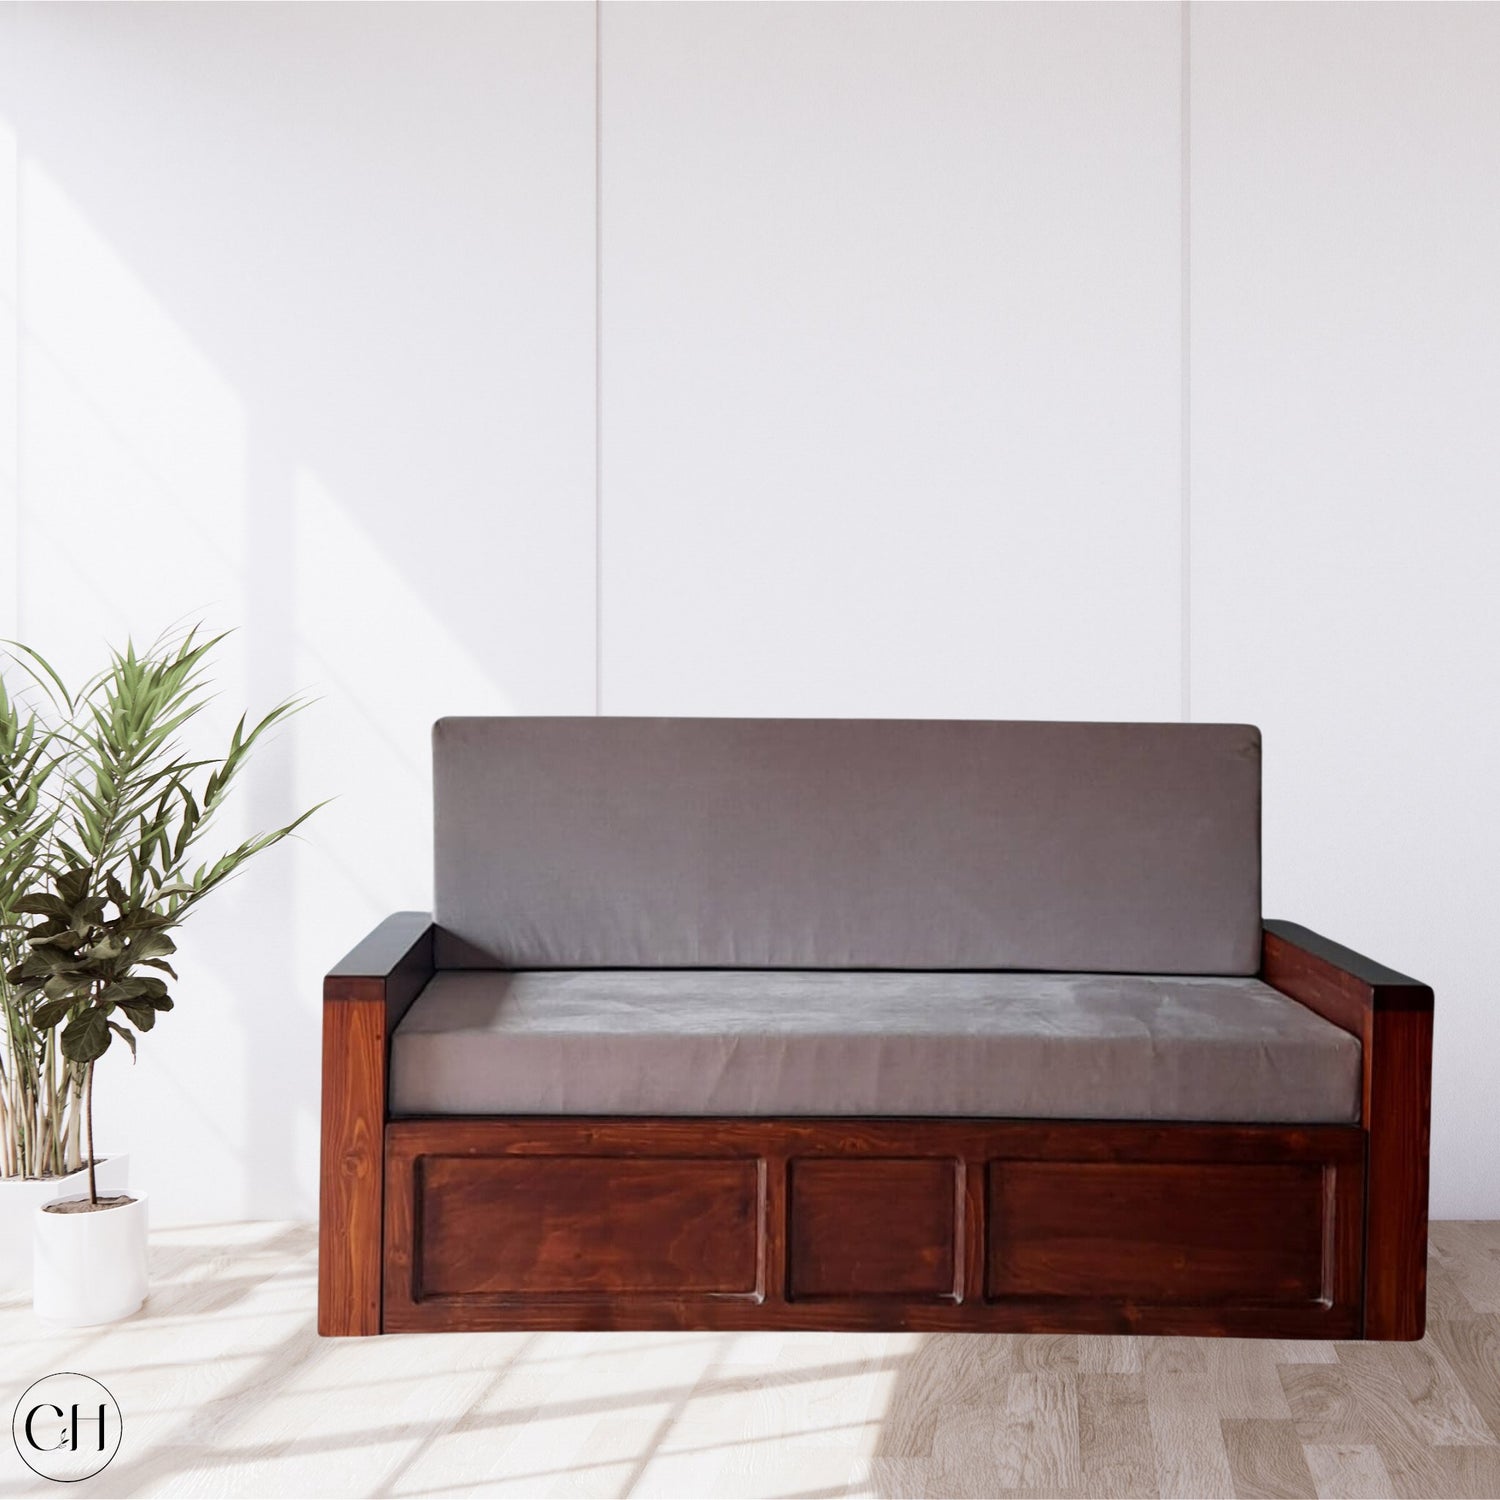 CustHum - Sofa-cum-bed in grey upholstery, placed against white wall with a couple of planters on the left